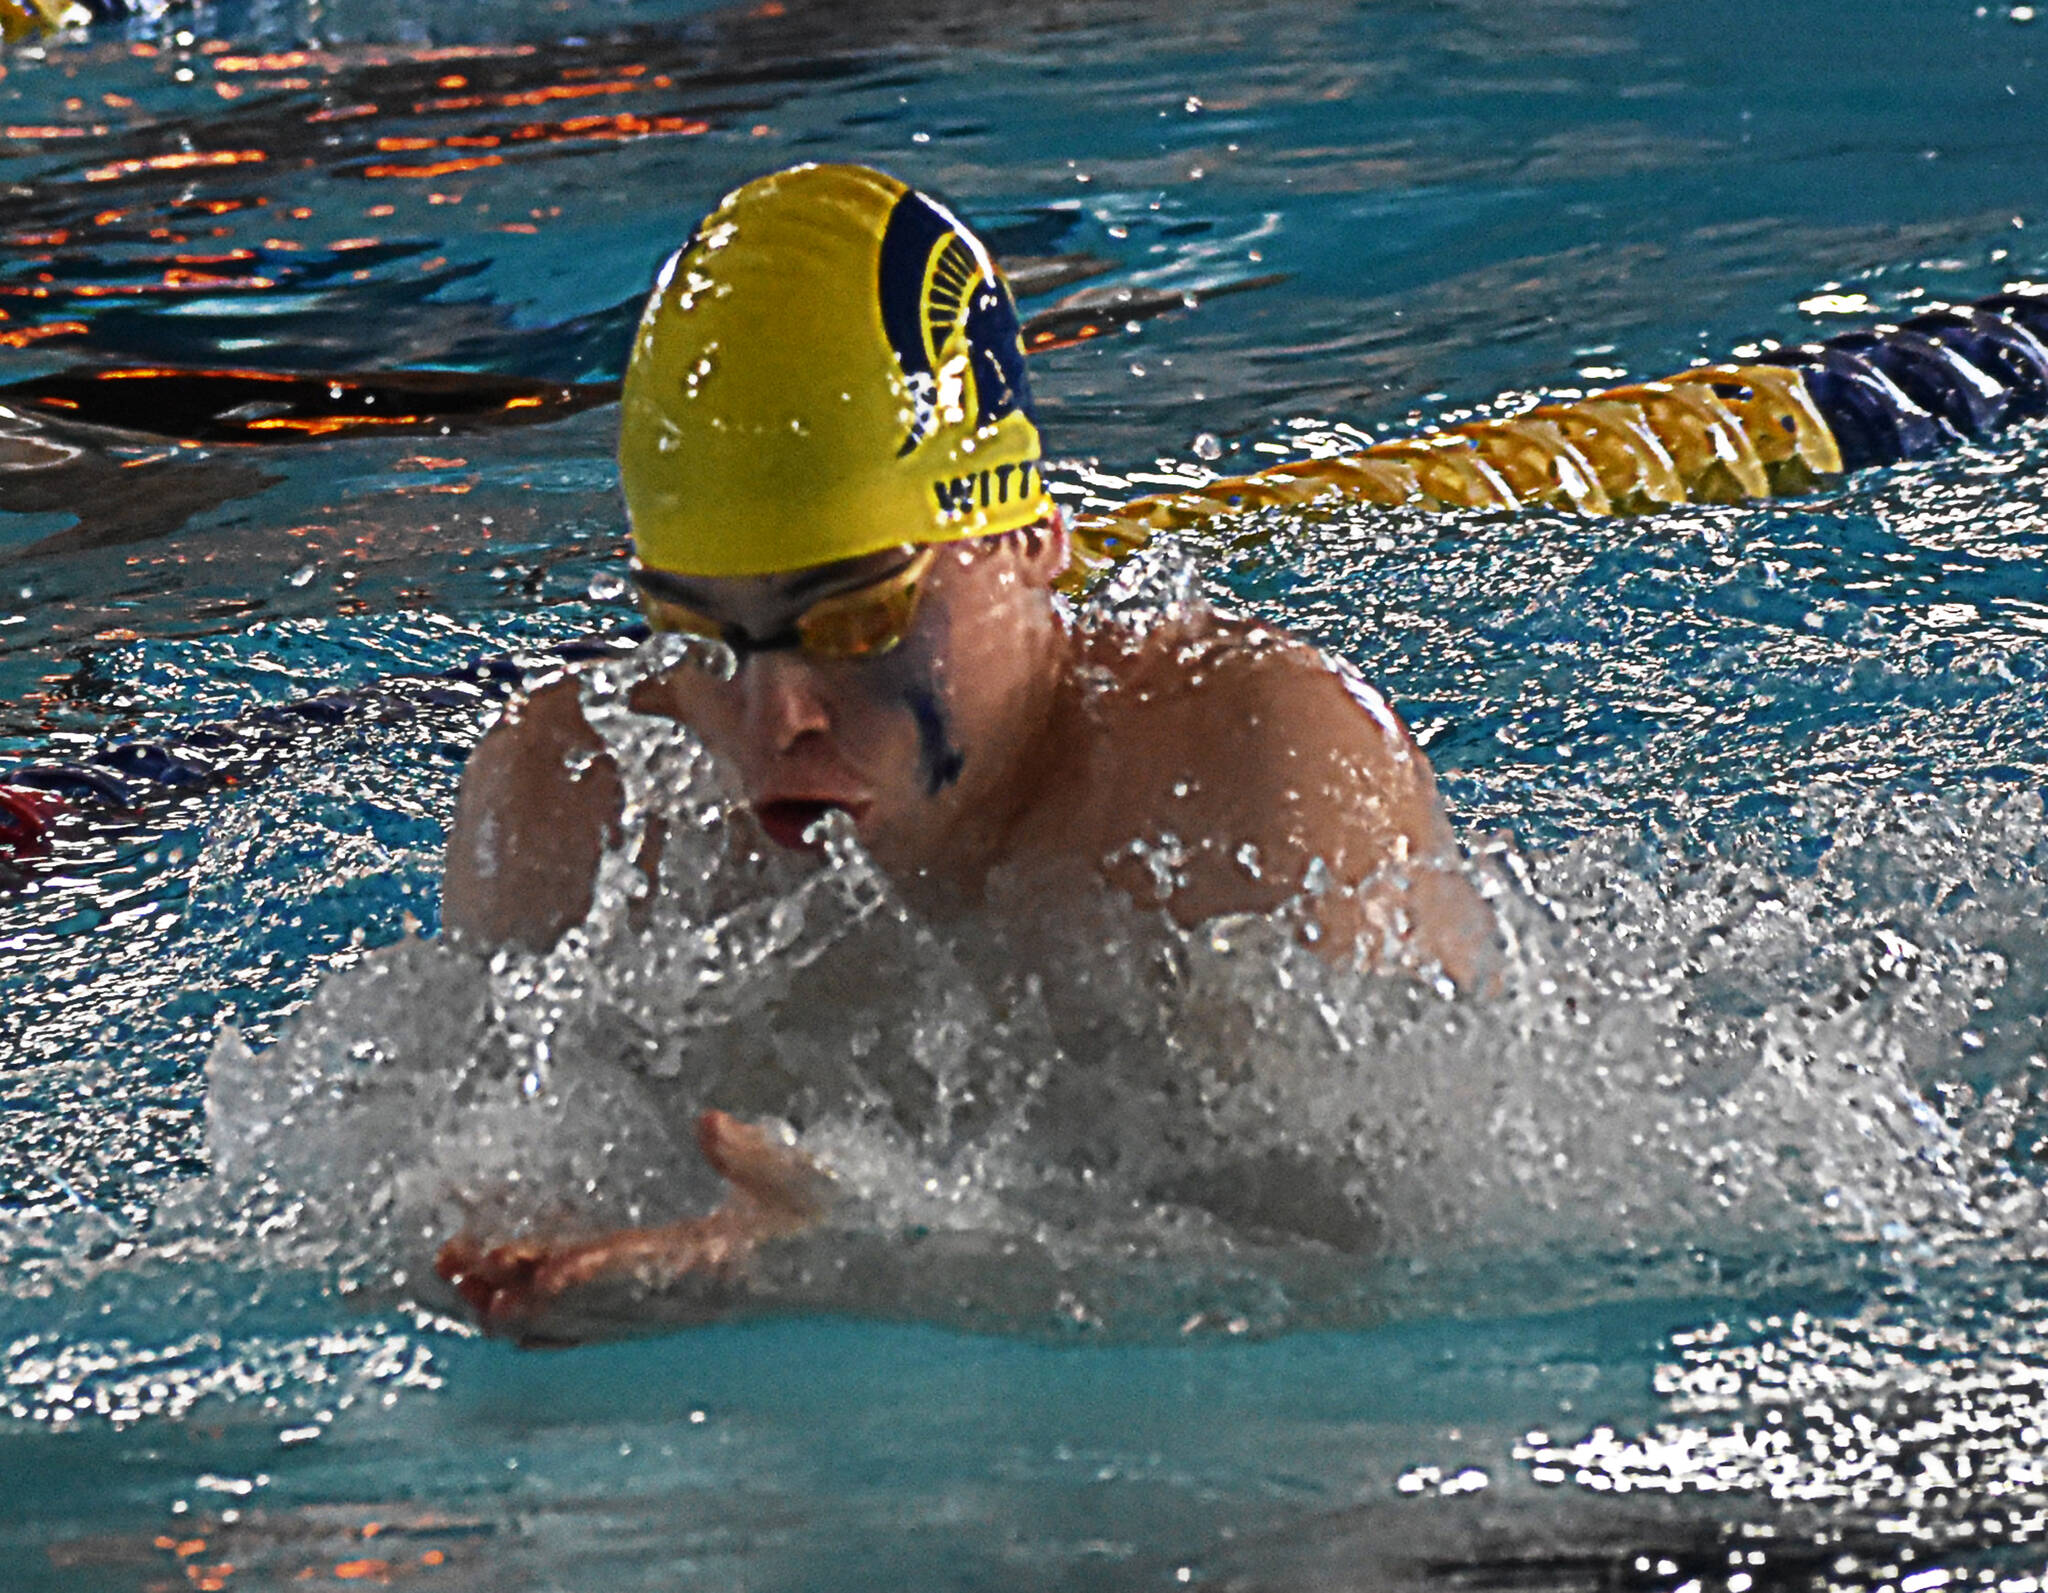 Thomas Witty took first in the 200-yard medley and 400-yard freestyle relays.